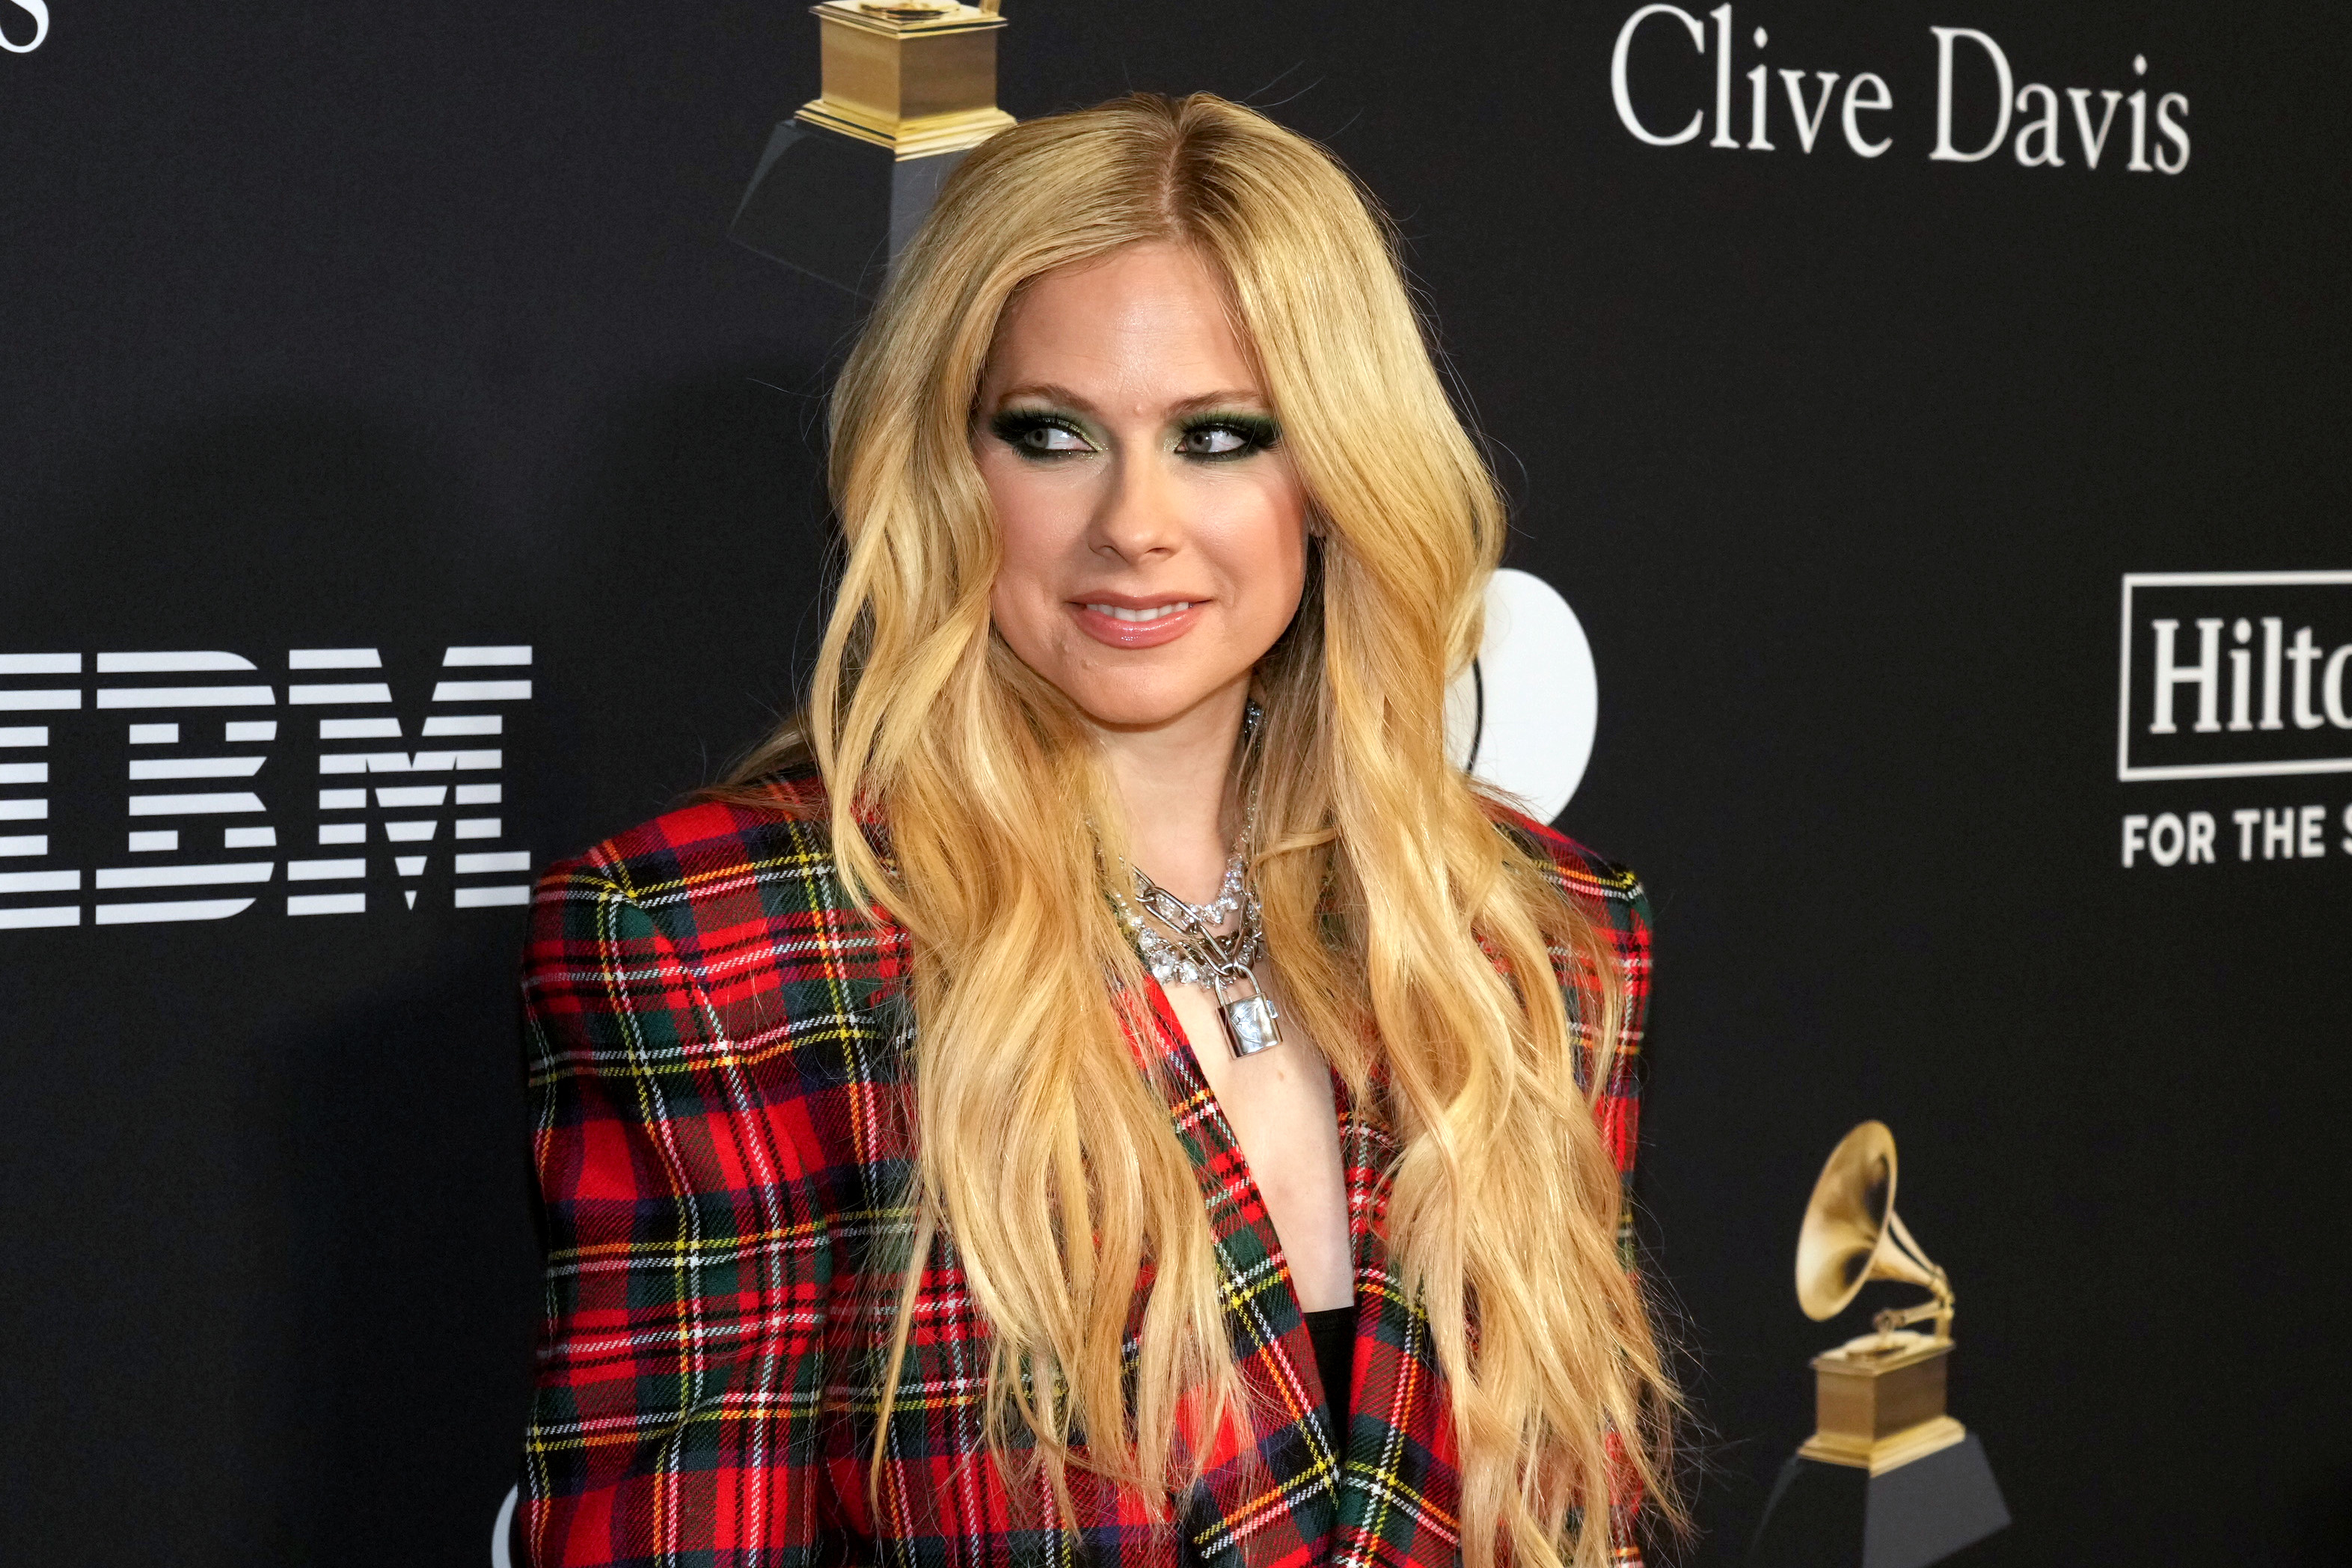 Avril Lavigne poses at an event wearing a plaid suit jacket and heavy makeup